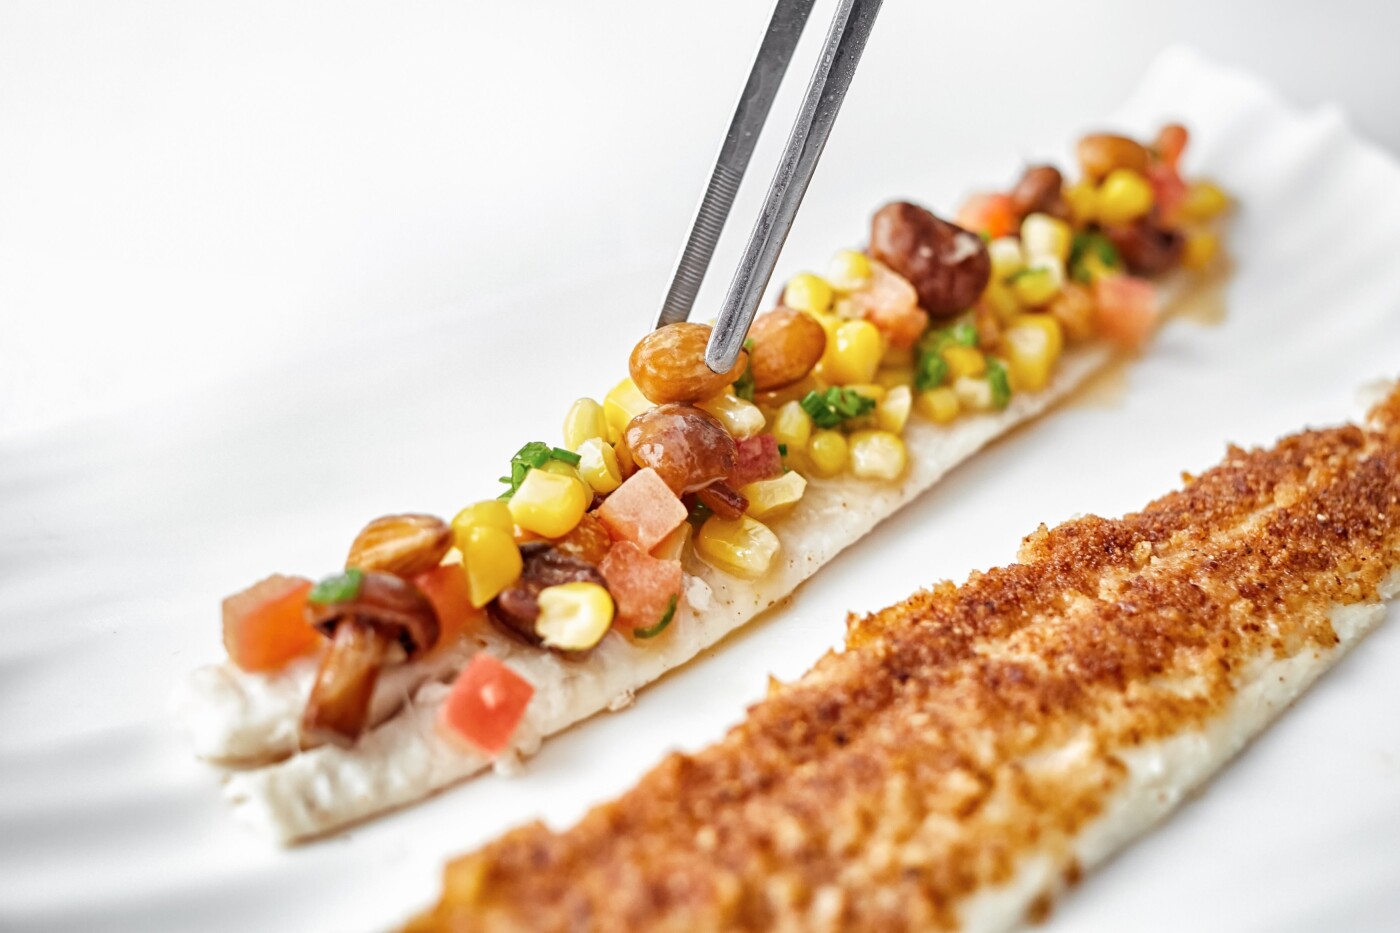 I shot this for Zagat in 2014 for their feature, "Melisse Through the Years, Dish by Dish” featuring the iconic Santa Monica restaurant.This classic dish is sole fish topped with a brown butter salsa consisting of corn, tomatoes, chanterelles, corn stock, and almonds.This was lit with diffused window light and shot with the Canon EF 40mm f/2.8 STM lens.